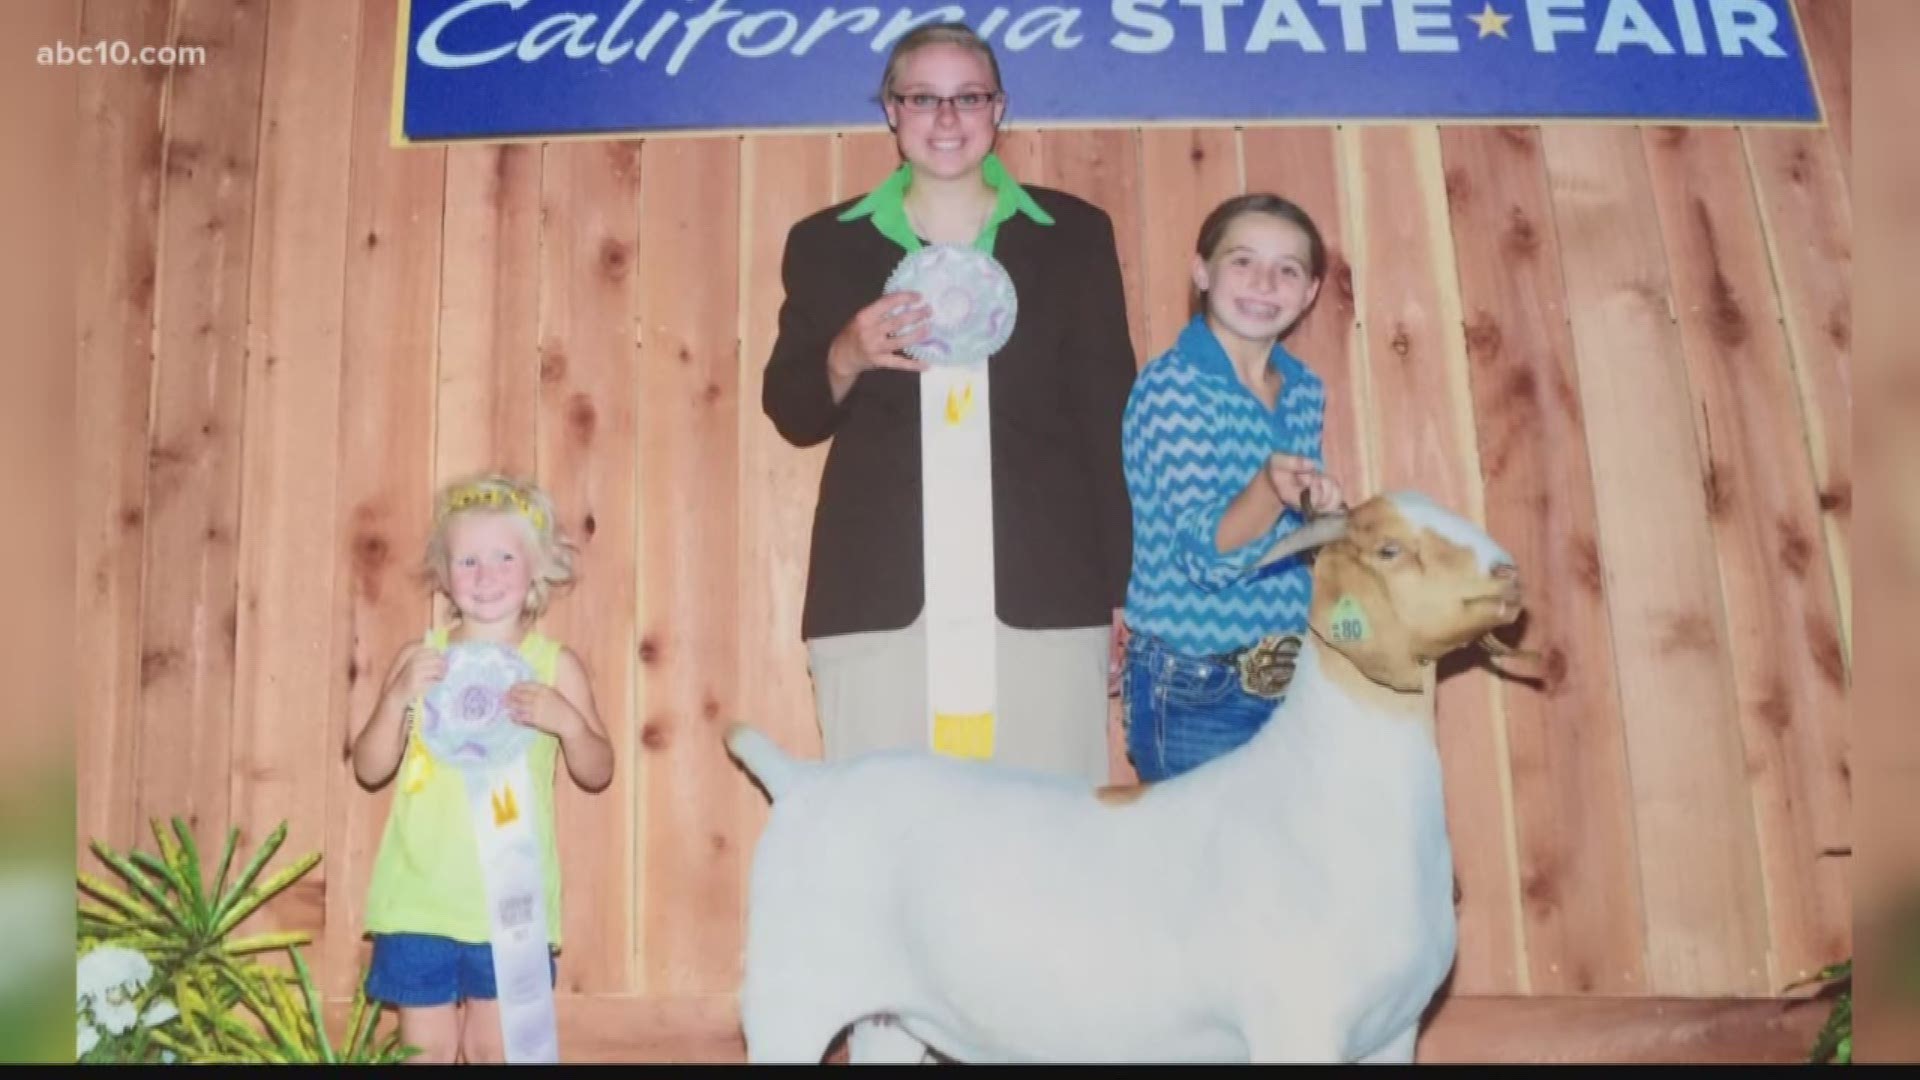 A family is searching for their pregnant show goat who is missing in Lodi.